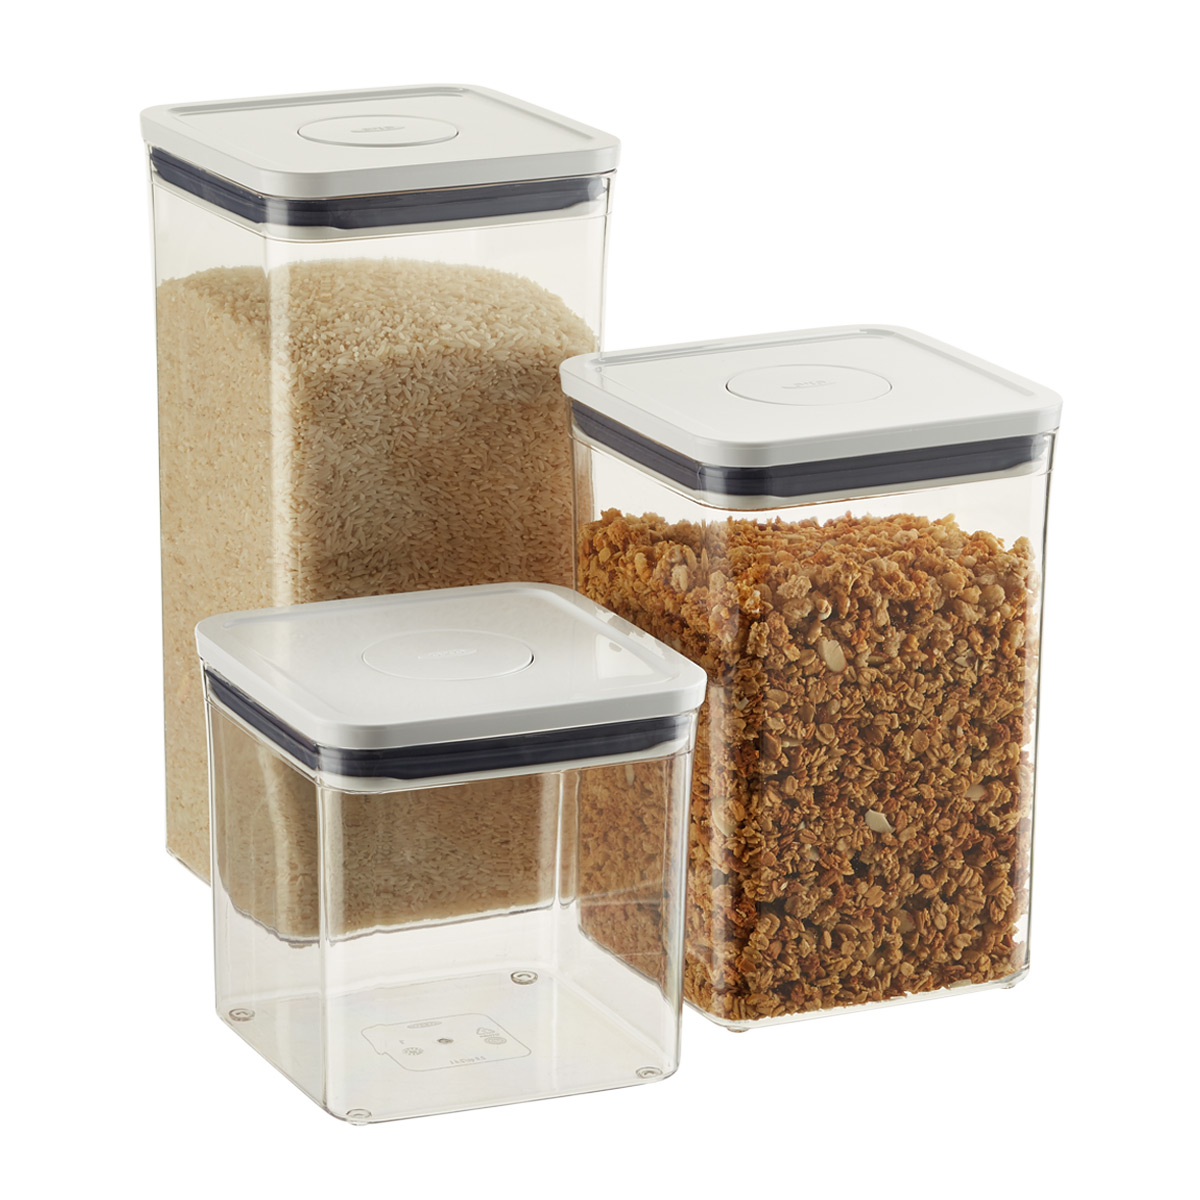 OXO Good Grips POP Square | The Container Store